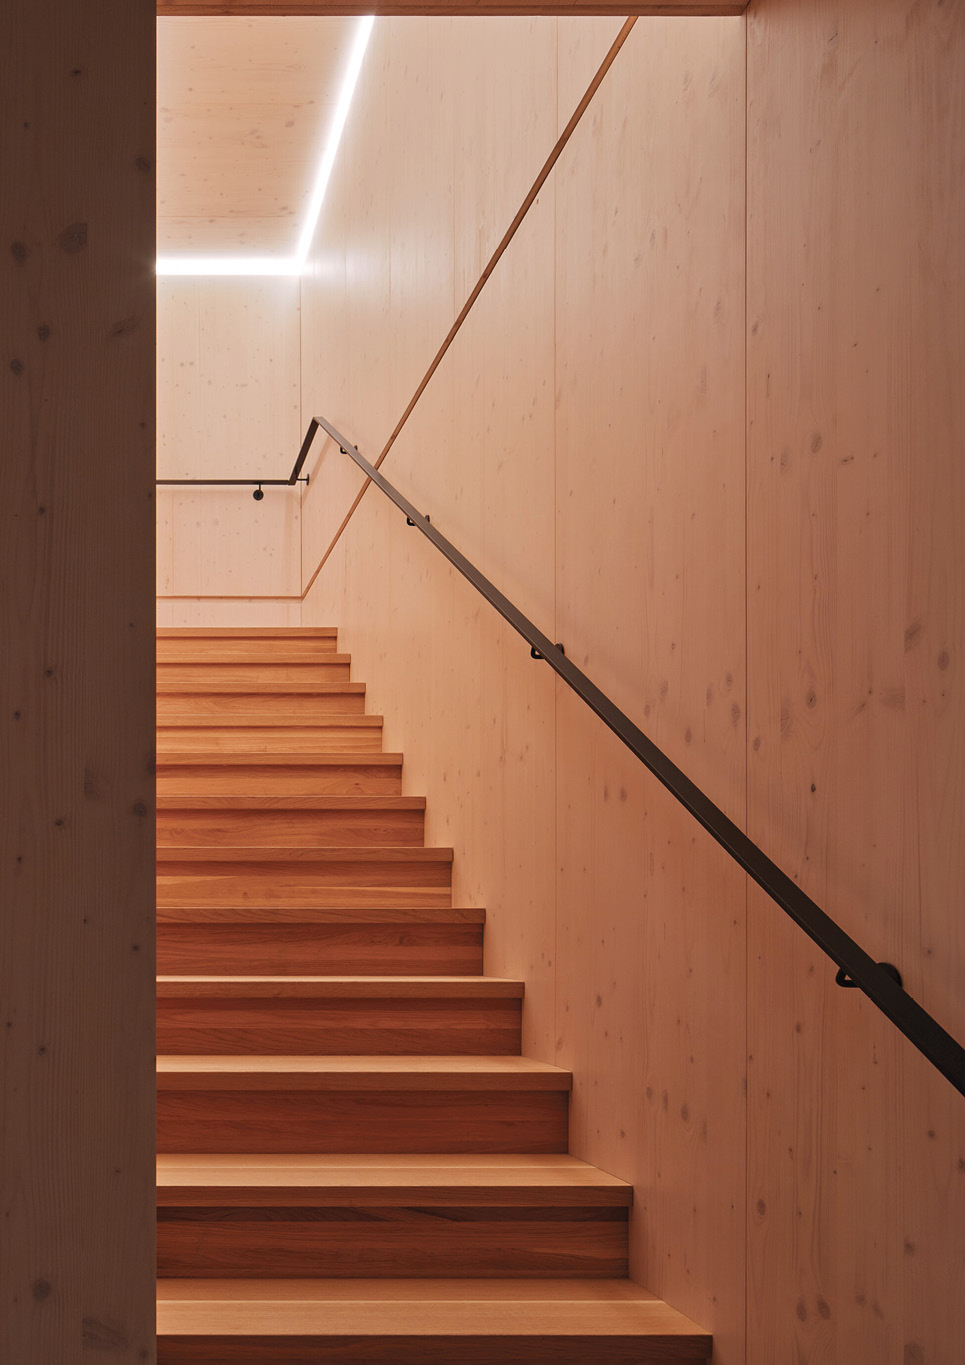 A wooden staircase inside Warm Nest, a Maggie care facility.